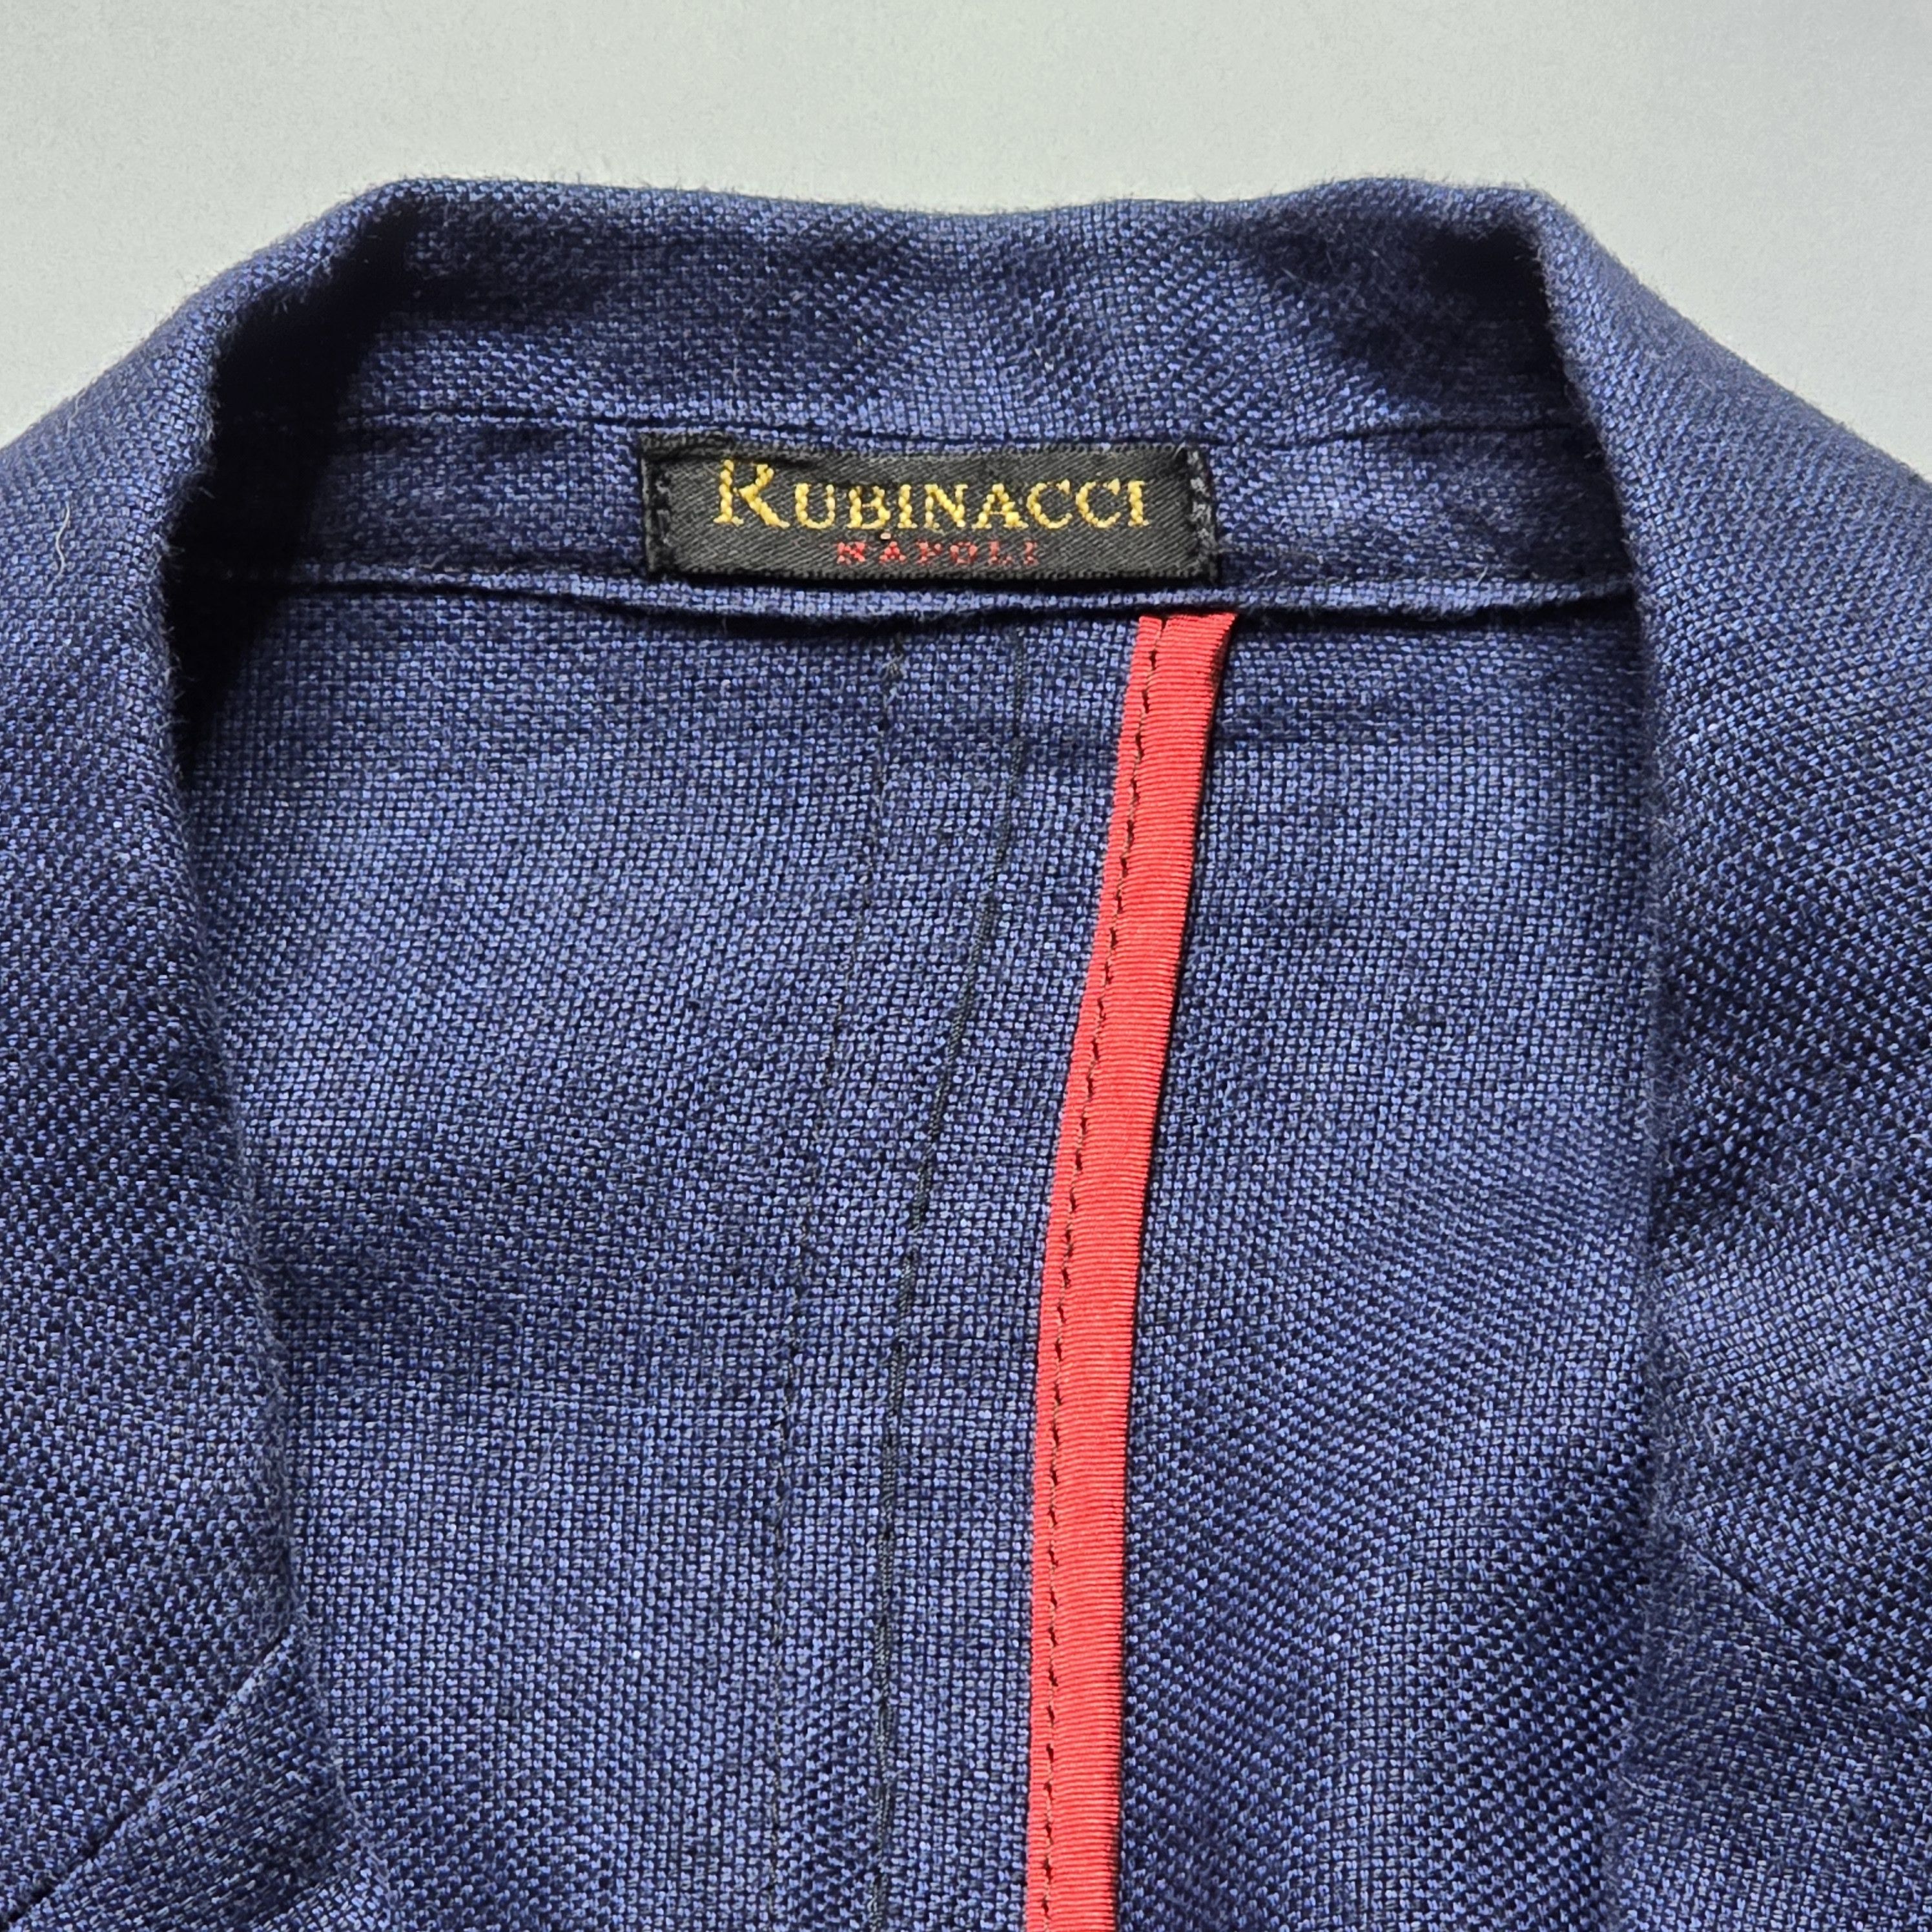 Rubinacci - Navy Unstructured Double-Breasted Linen Blazer - 6